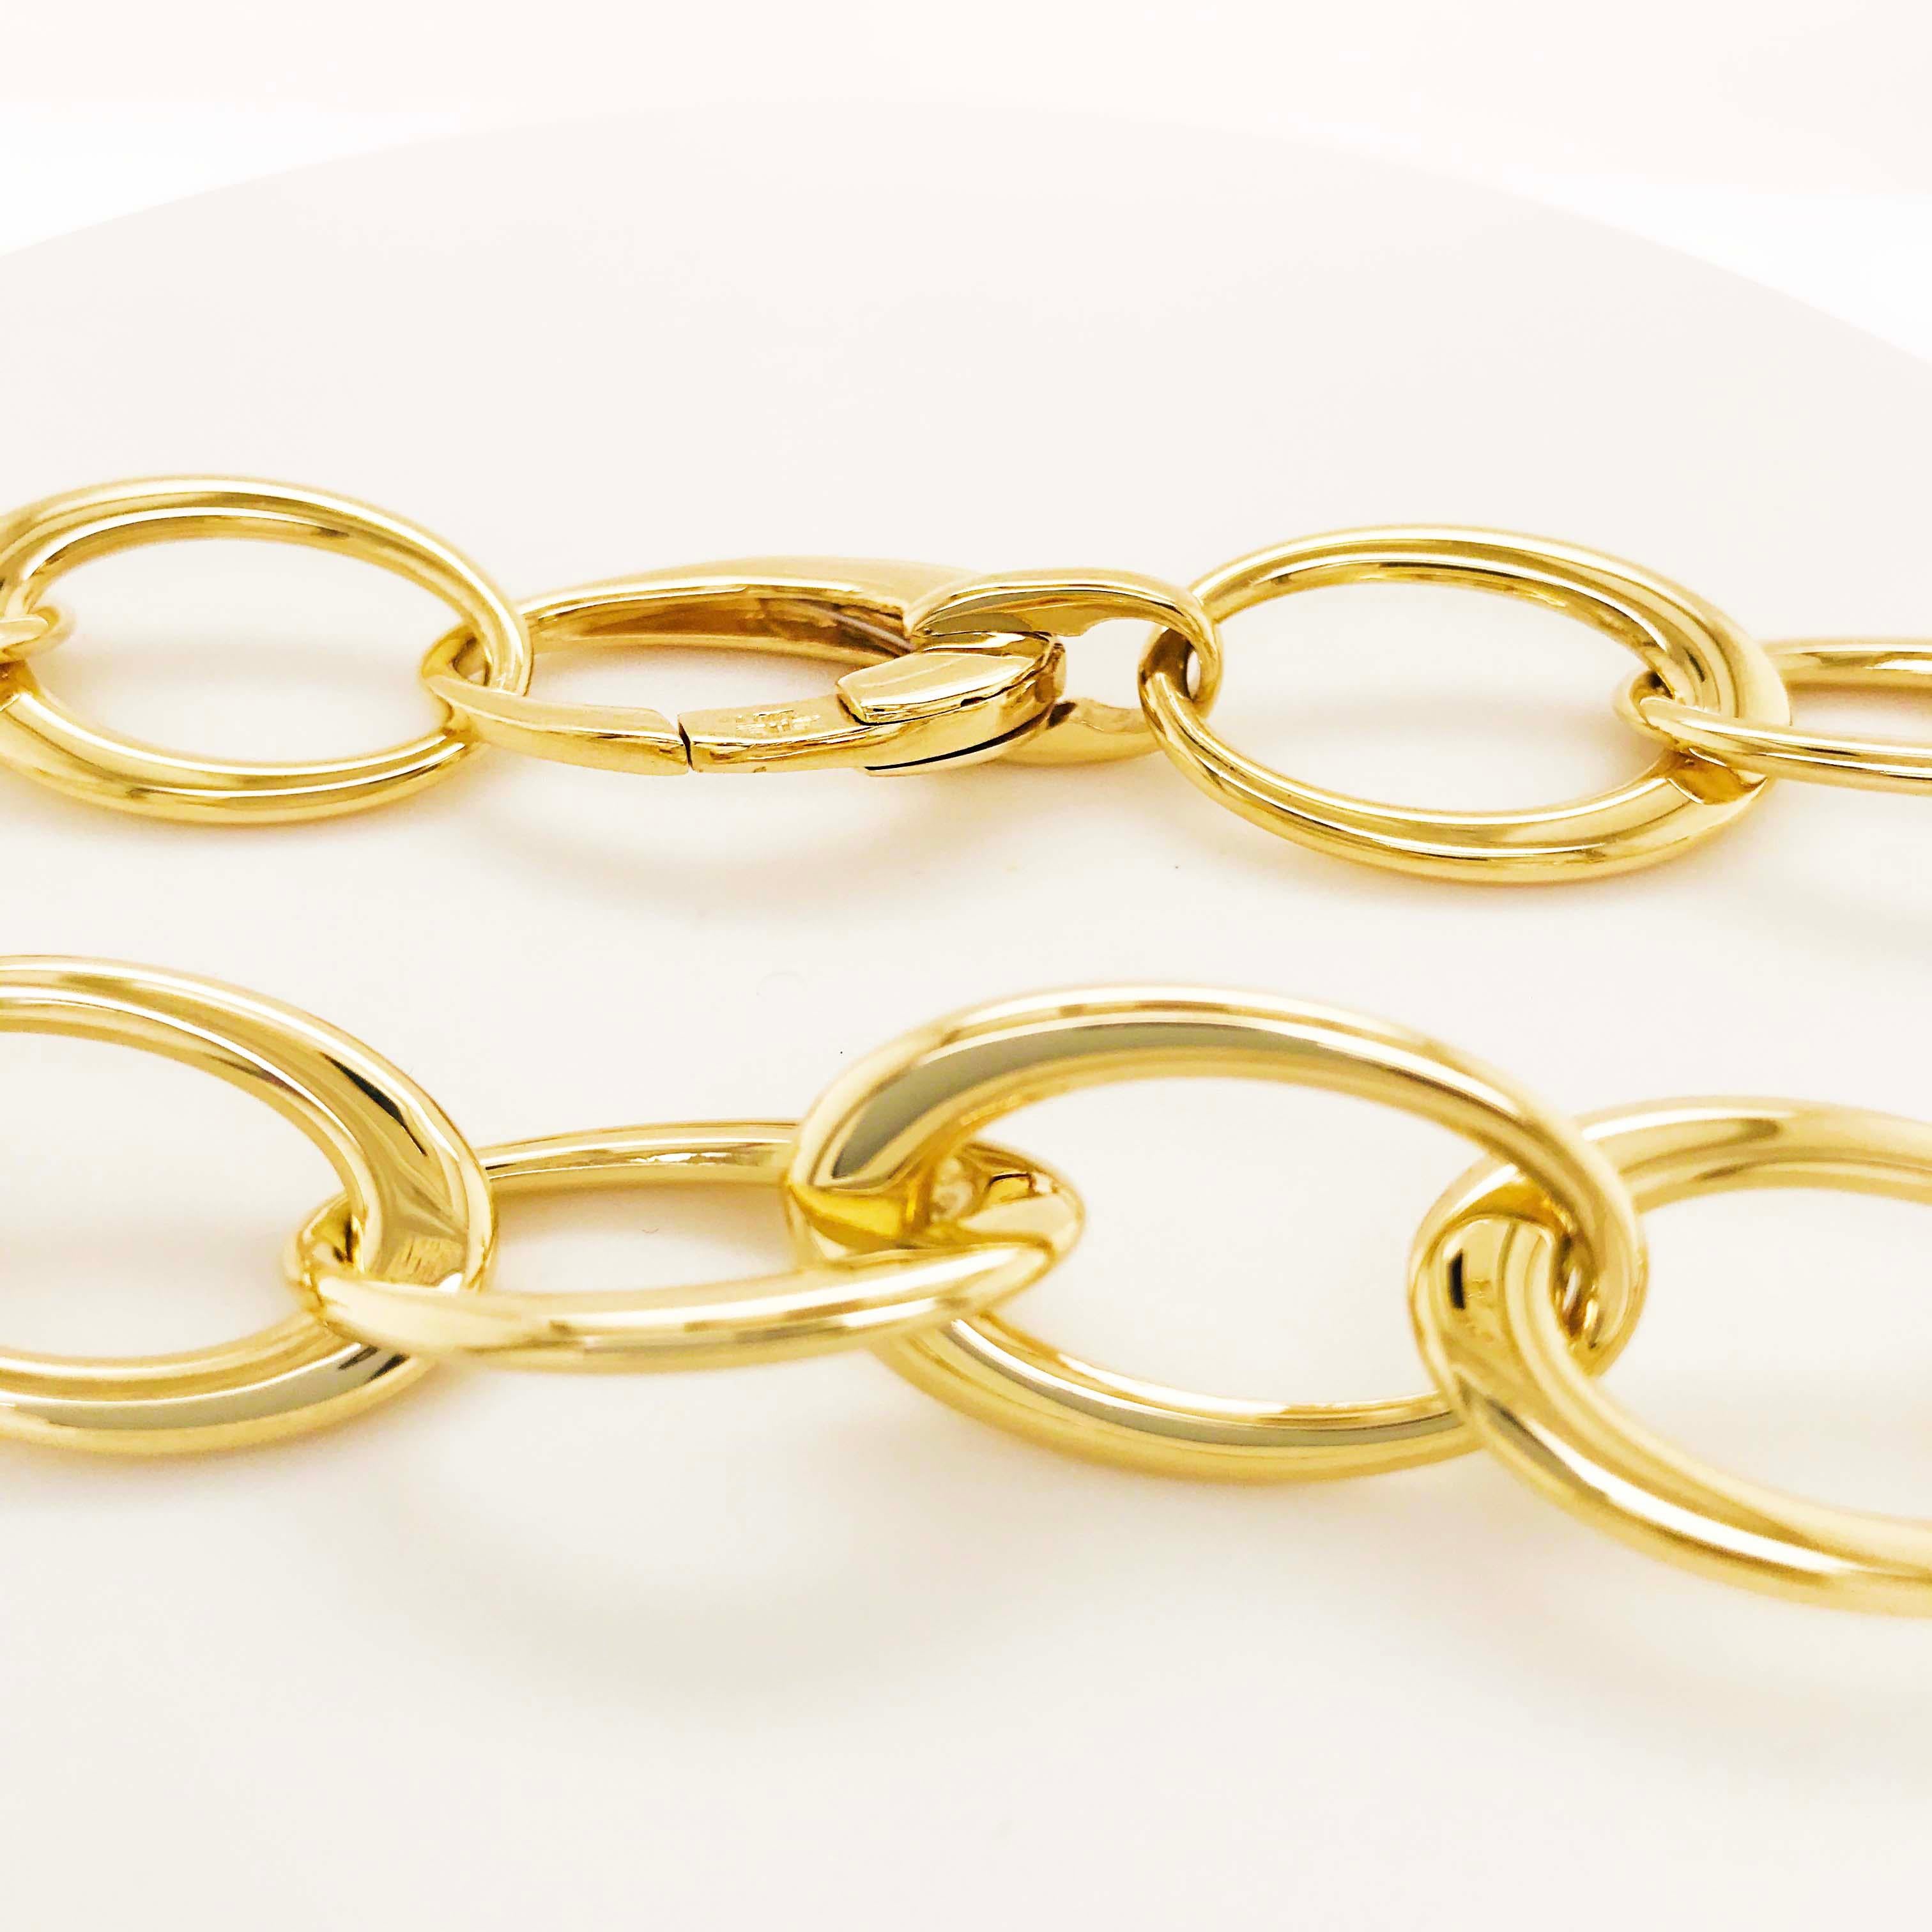 Modern Large Link Chain Necklace-Open Oval Link 14 Karat Gold Chain Lobster Clasp